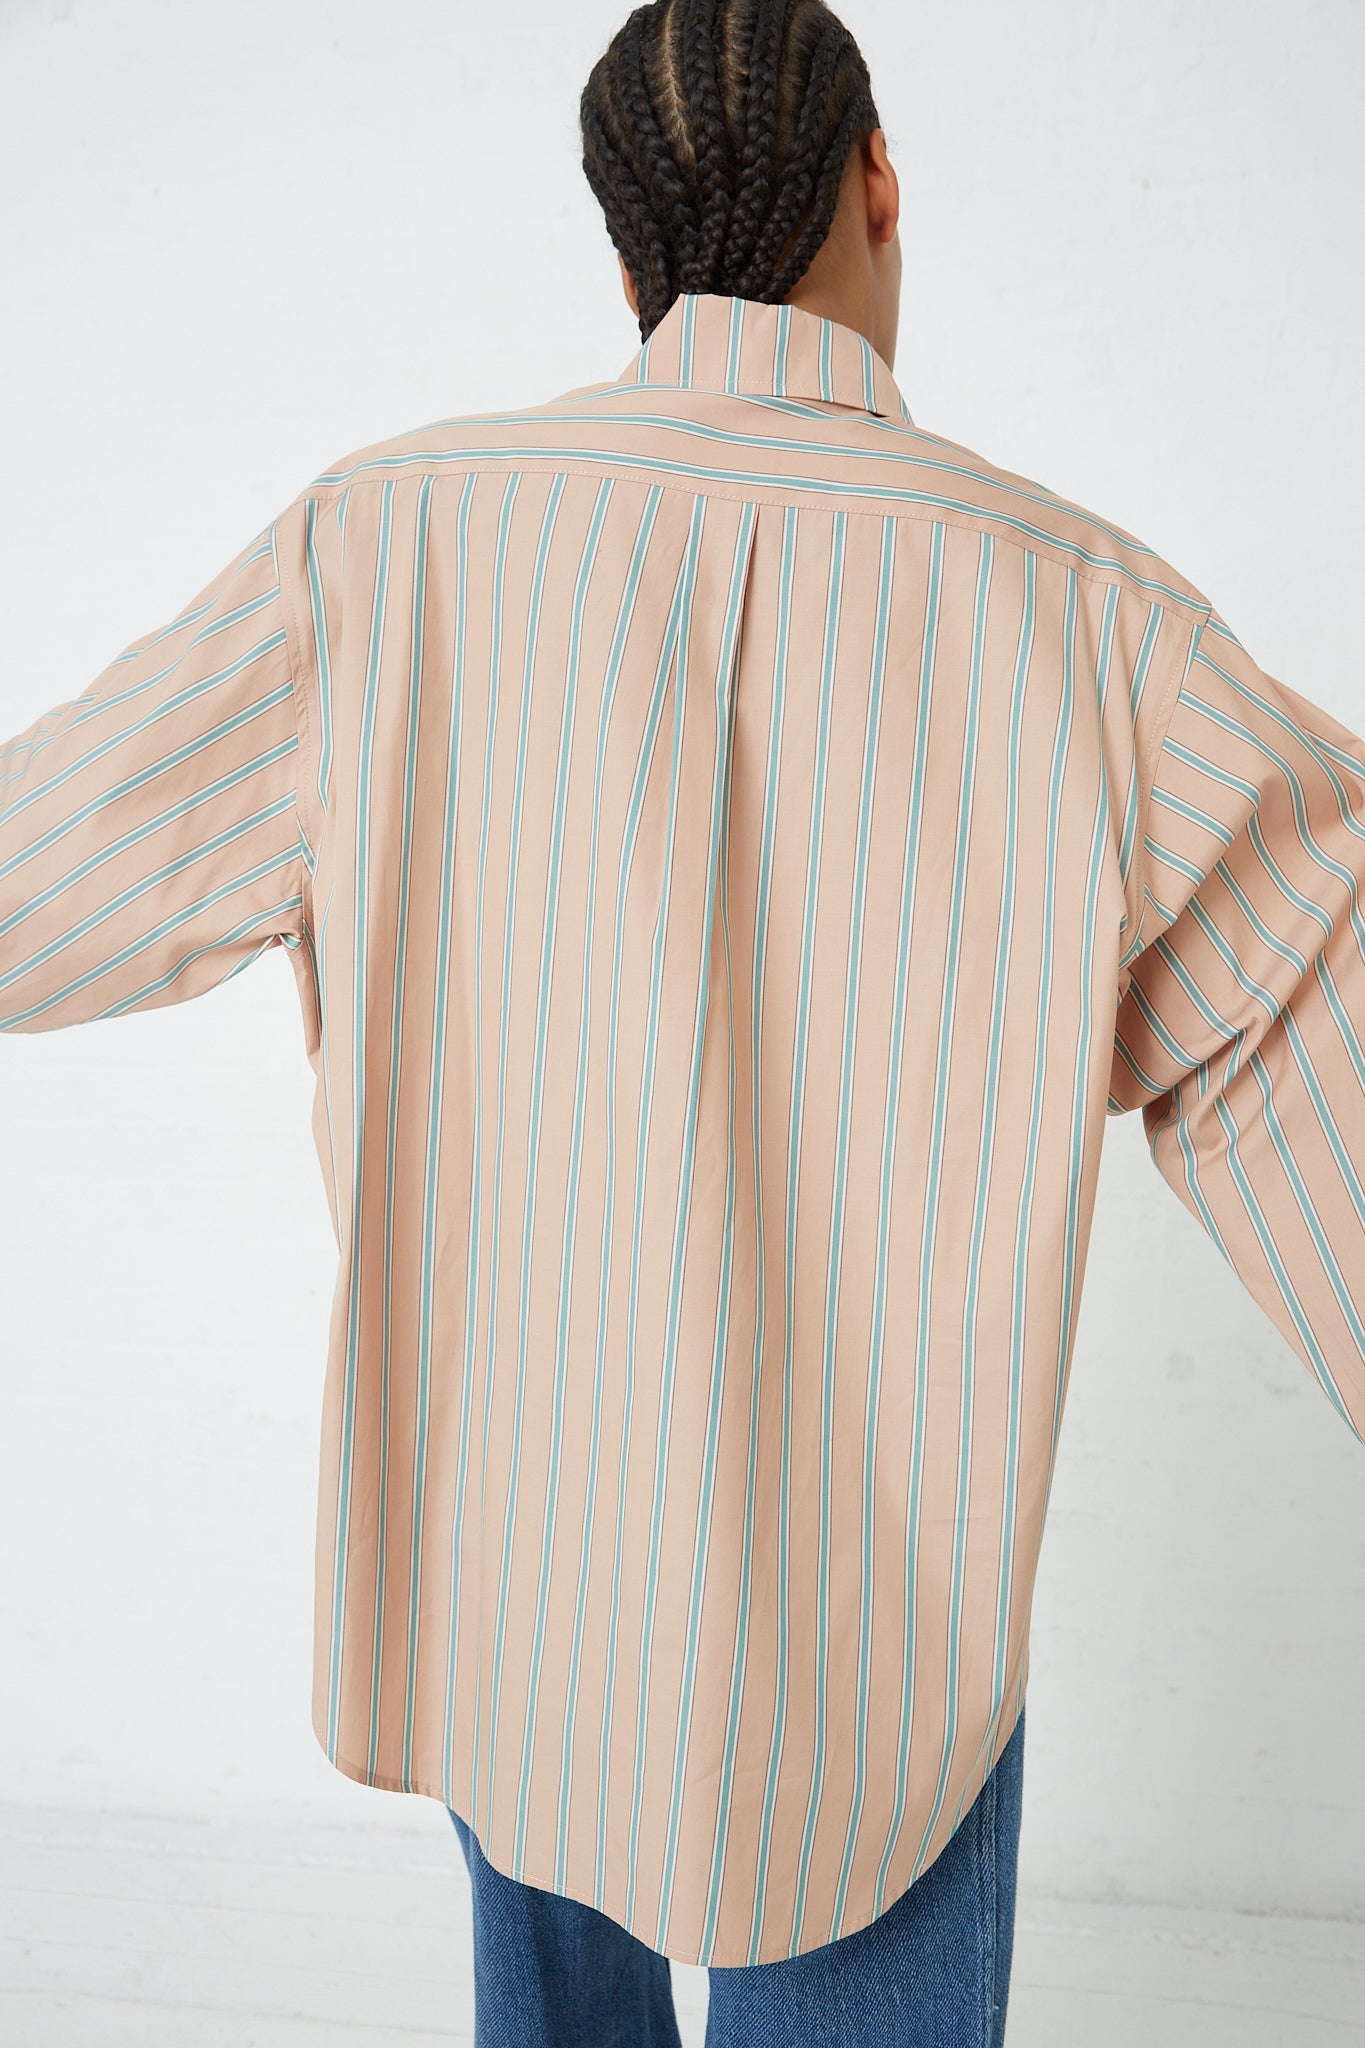 The back view of a woman wearing a Rachel Comey Stripe Broadcloth Risa Top in Terracotta.